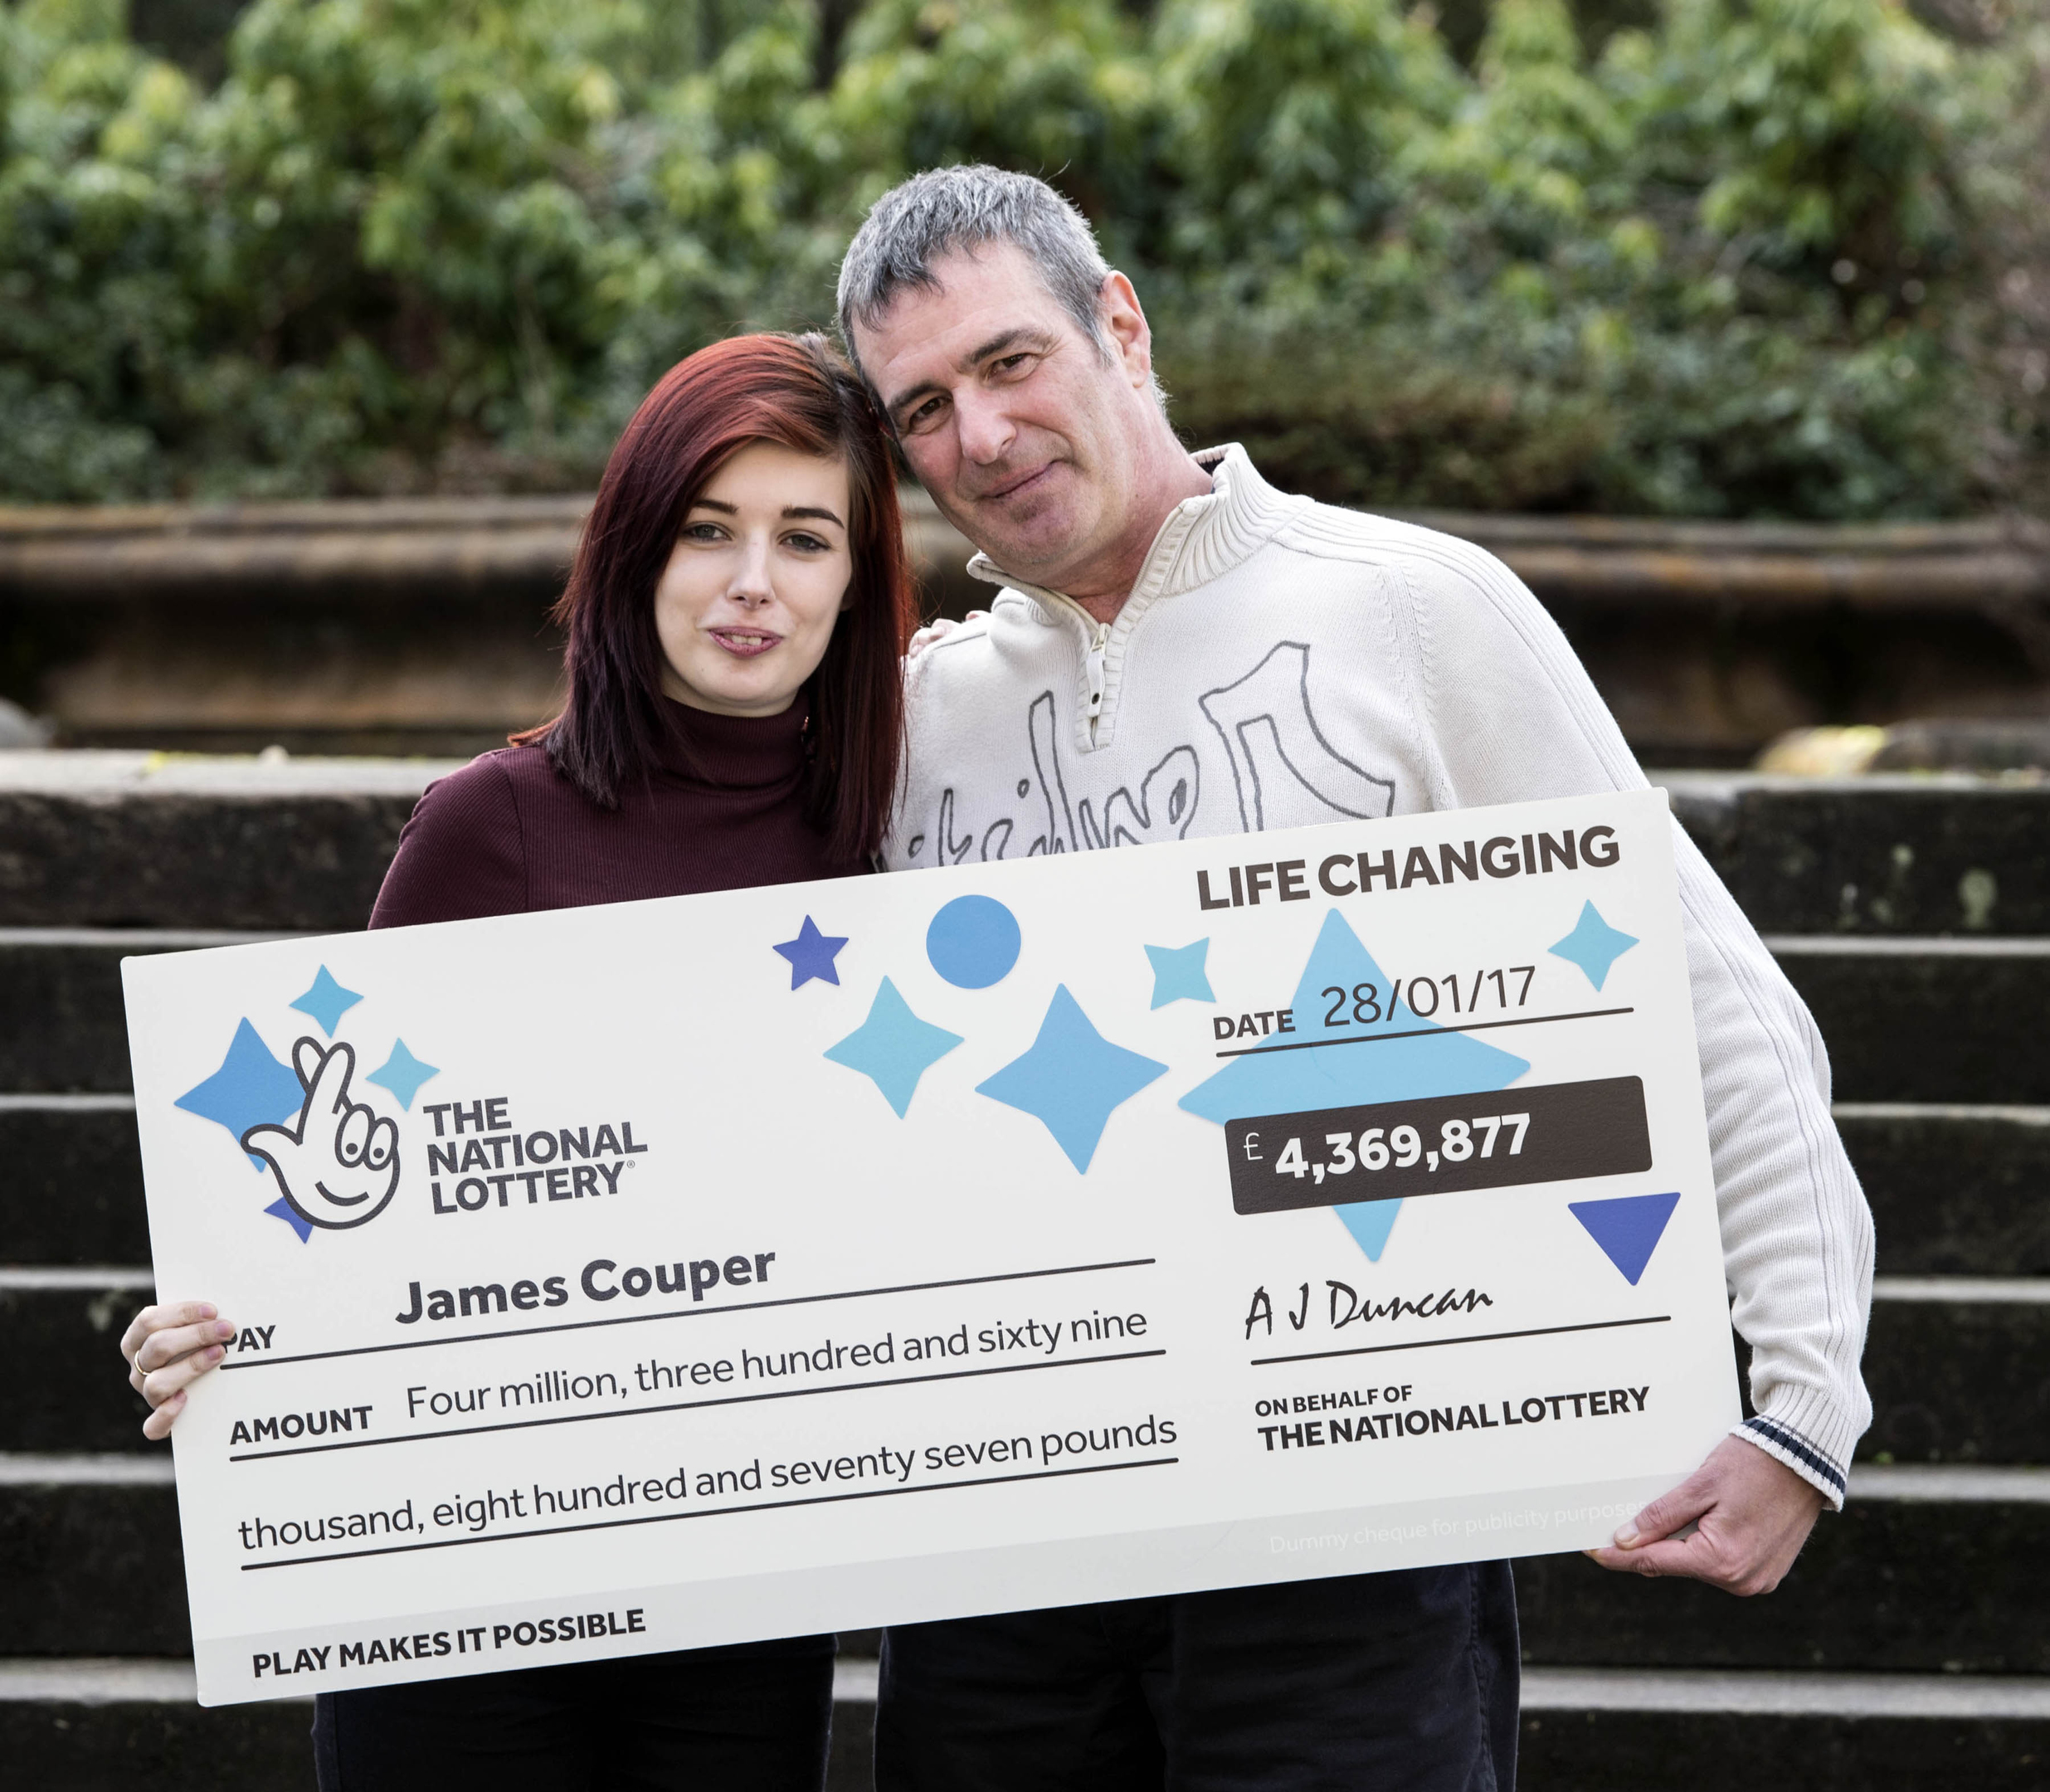 Lotto winner James Couper from Greenock with his daughter Rachel  after he won £4,369,877 in last Saturday's National Lottery draw (Christian Cooksey/Camelot/PA Wire)